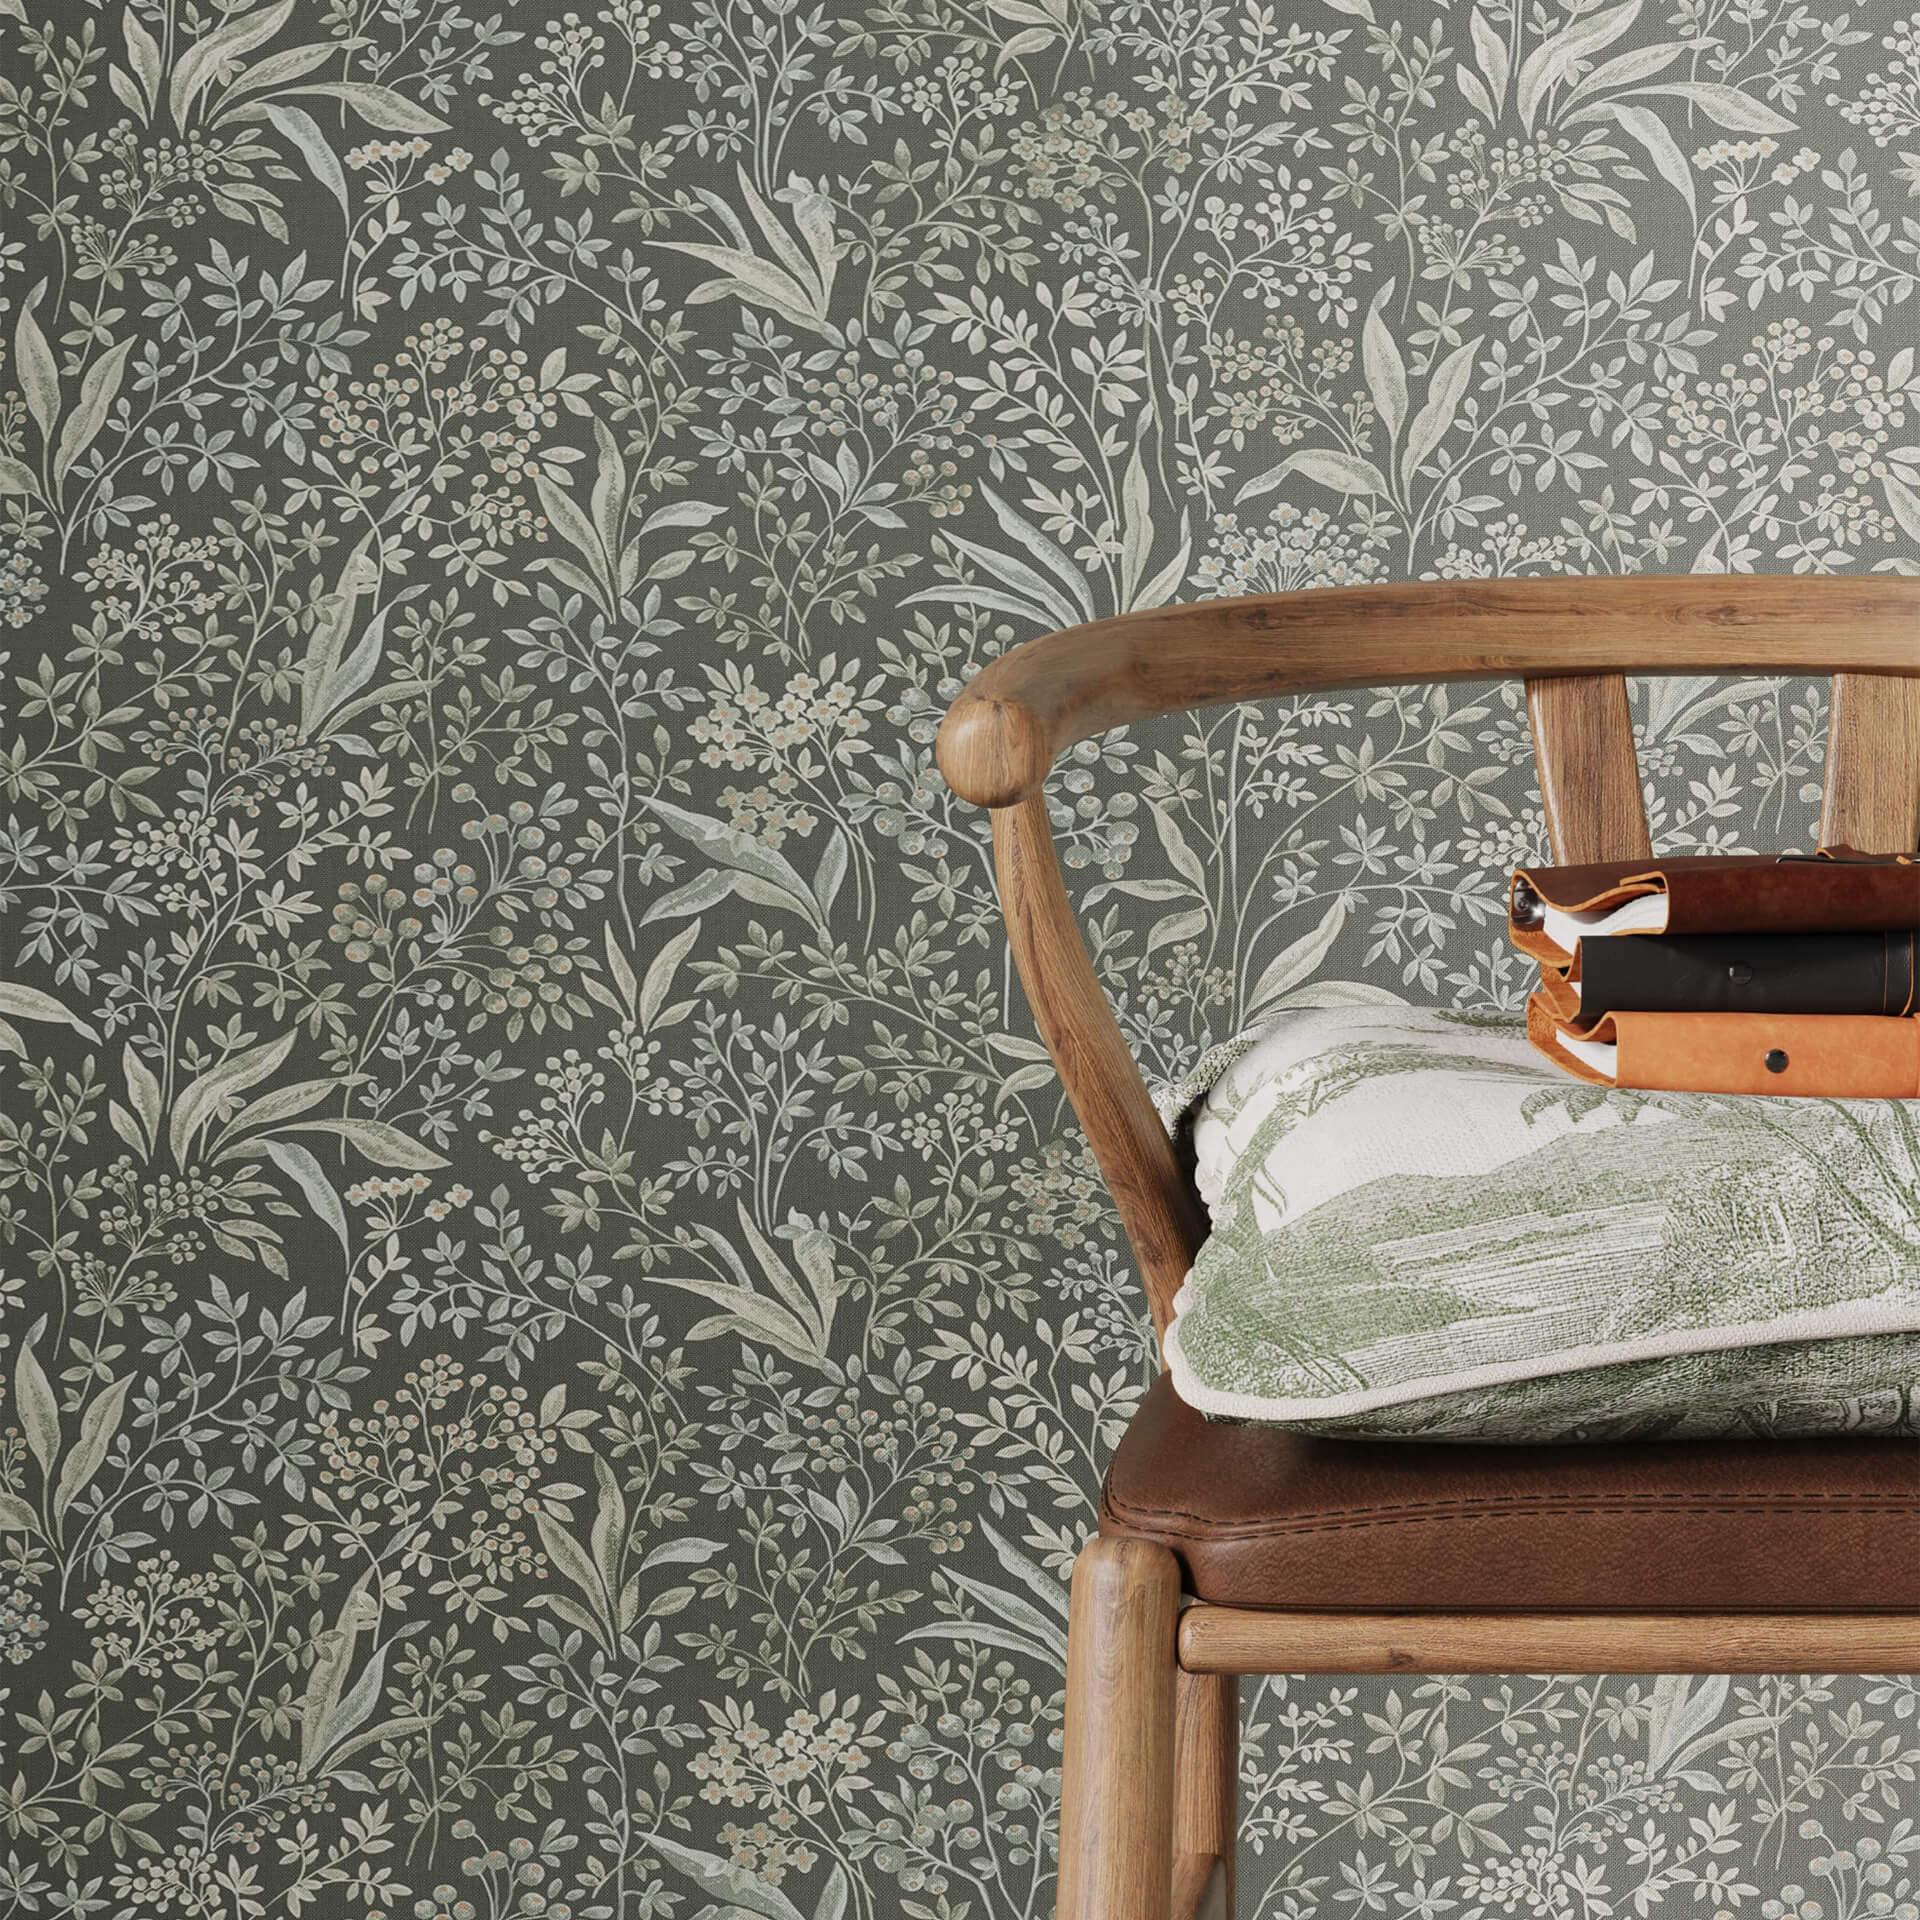 3D Rendering for Wallpaper with Botanic Print